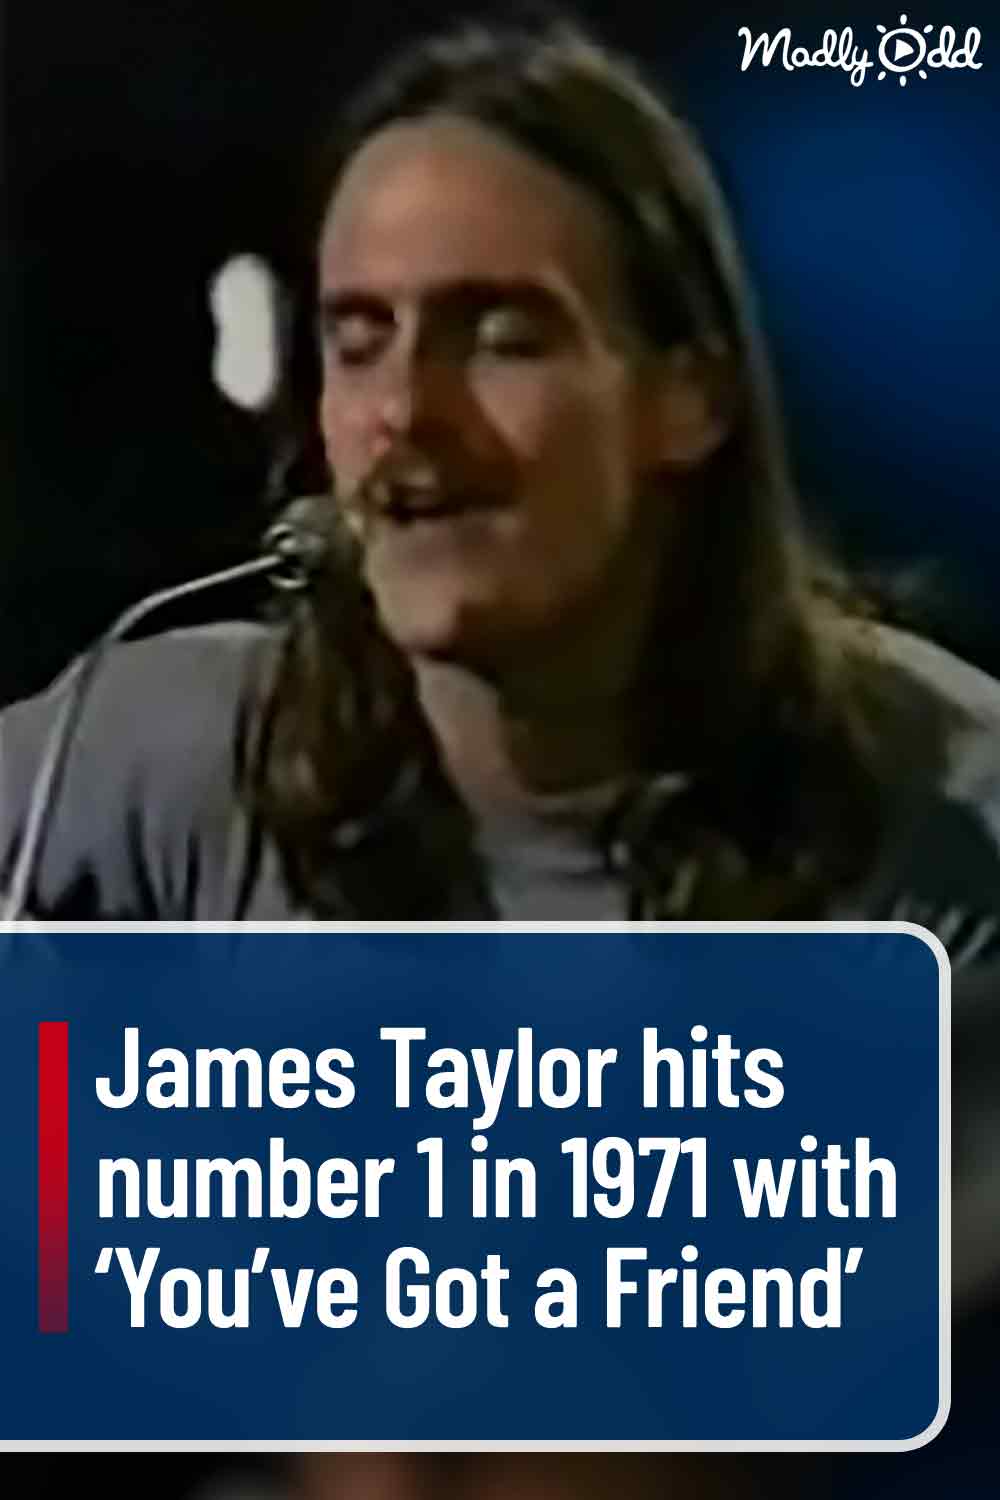 James Taylor hits number 1 in 1971 with ‘You’ve Got a Friend’